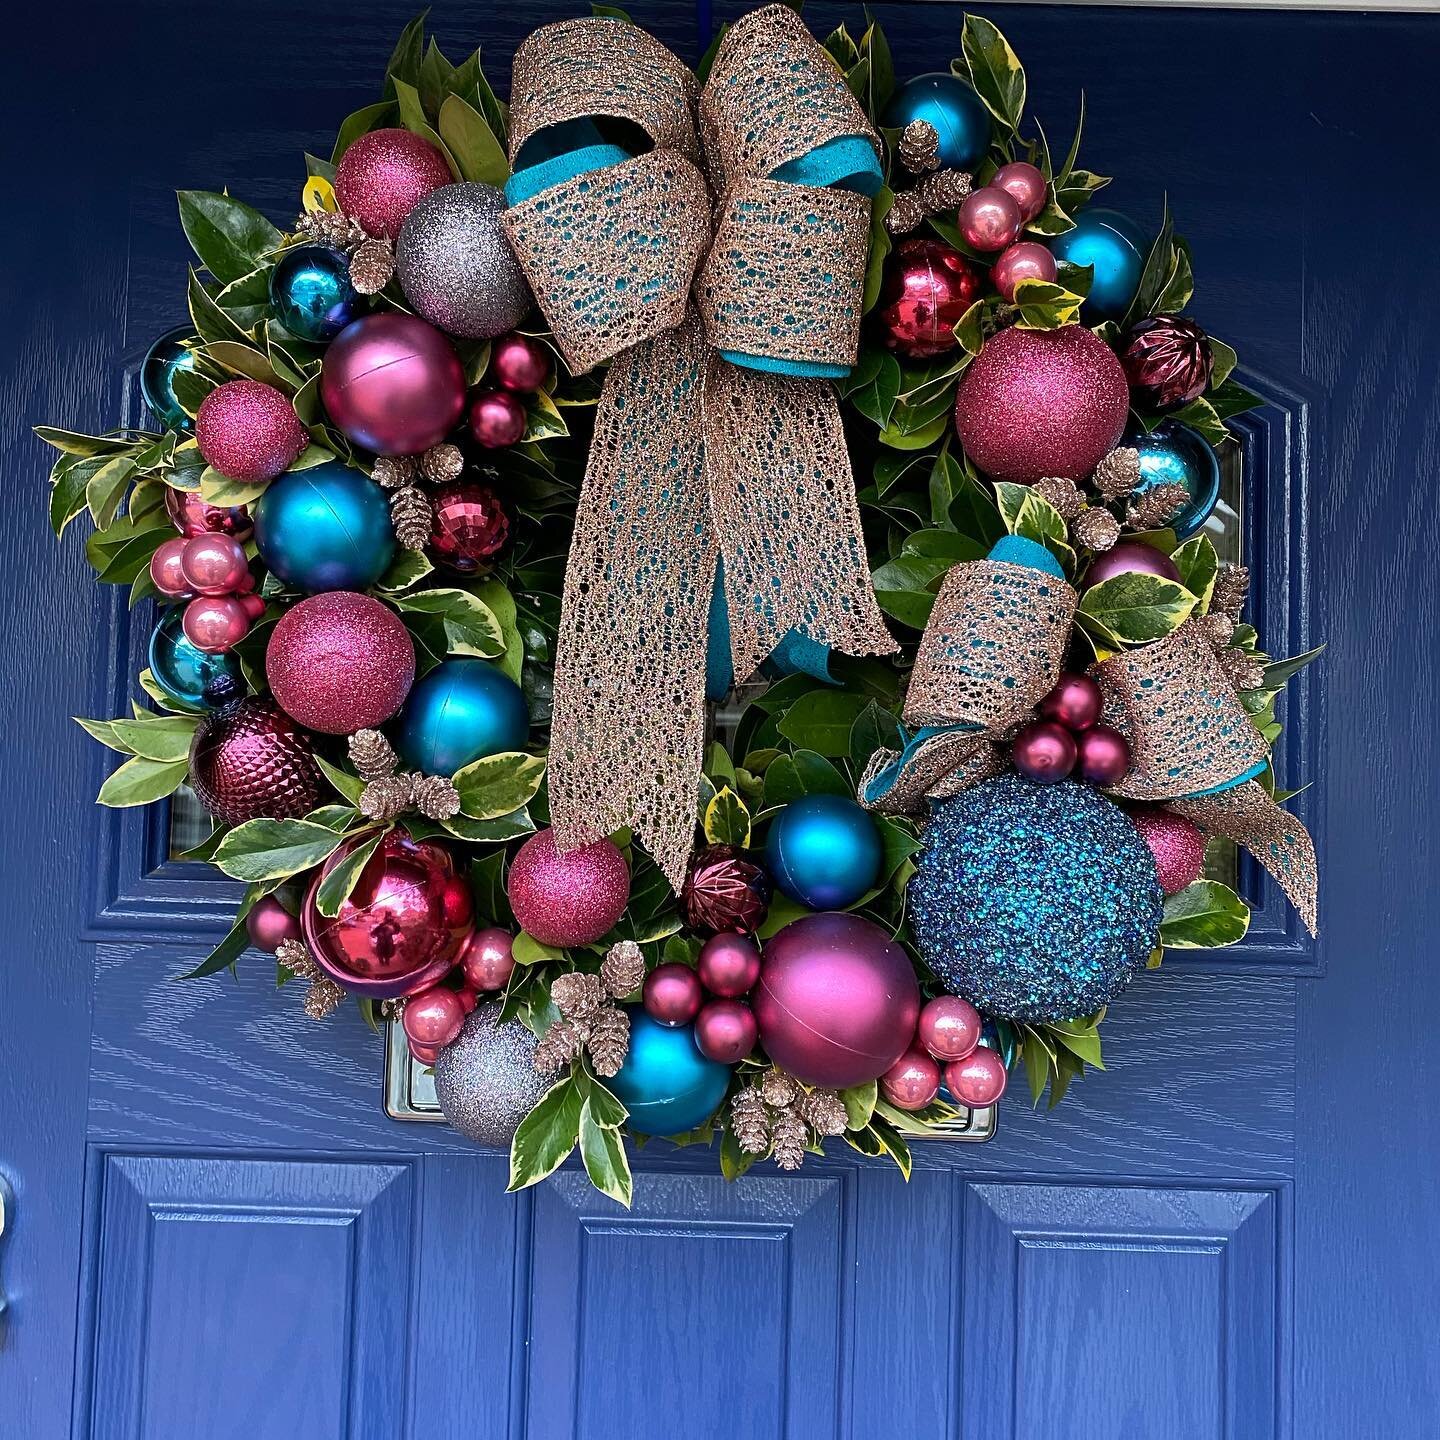 &ldquo;Baubletastic&rdquo;

Something a little different but I like it.
#darerobedifferent 
Thank you @barnwellwreath @barnwellnursery 

#wreath #baubles #christmasdecor #pink#turquoise #sparkle #holly #twinkleatdcch #christmas #christmasdecor #eyeca